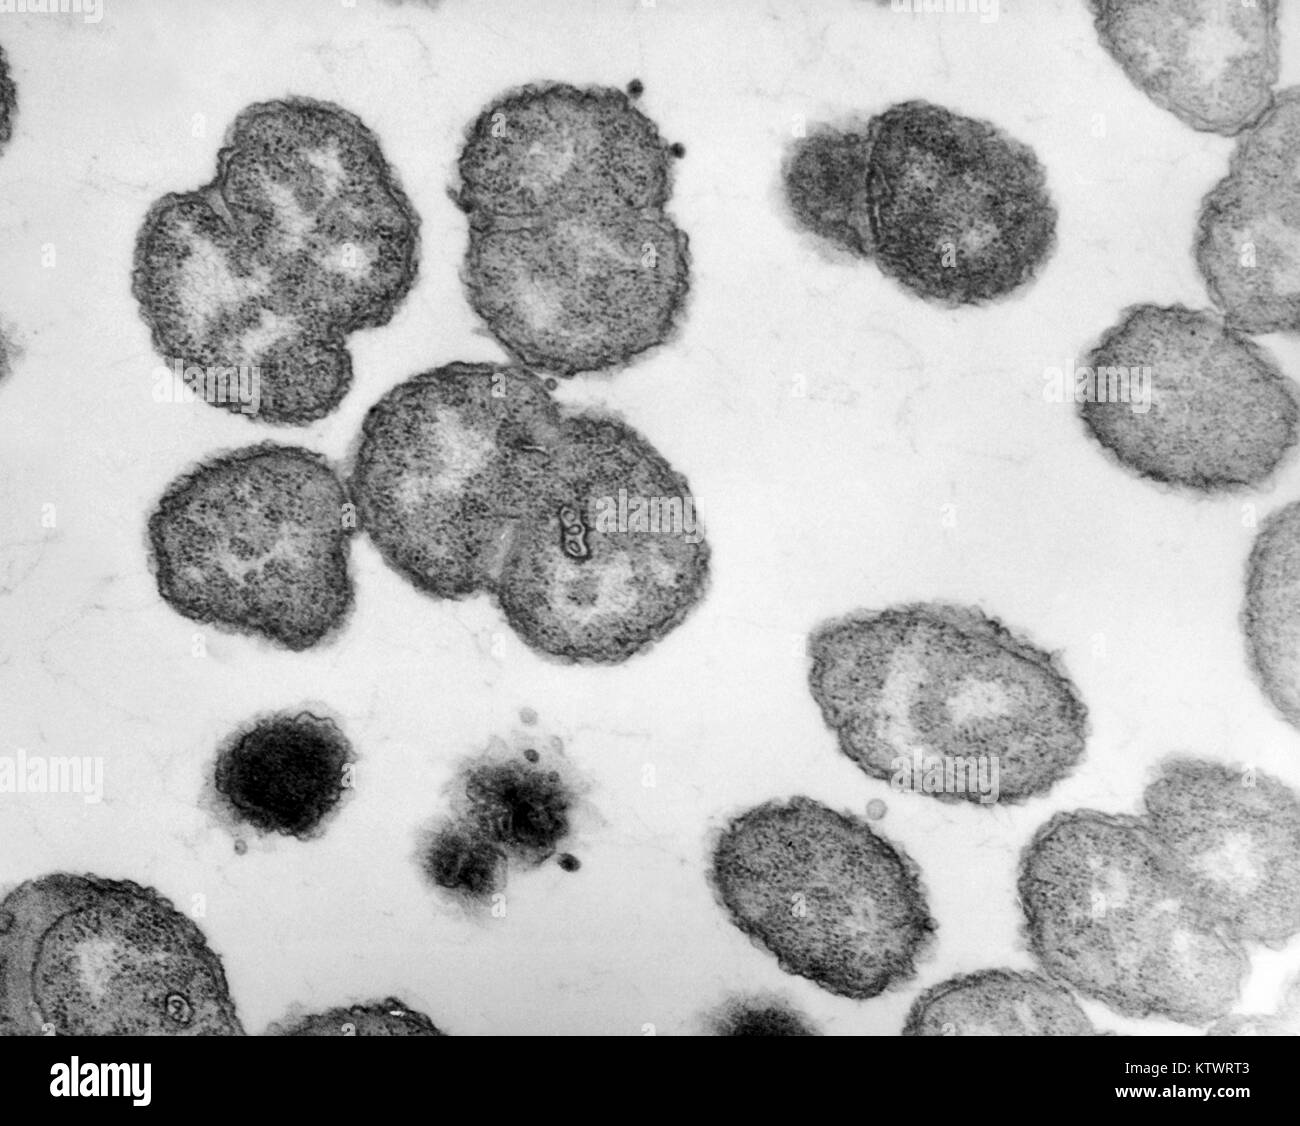 Electron micrograph of Neisseria gonorrhoeae bacteria, the causative agent of gonorrhea, magnification 100, 000X. In 2000, 358, 995 cases of gonorrhea were reported to the CDC, 1971. In the United States, approximately 75 percent of all reported cases of gonorrhea are found in younger persons aged 15 to 29 years. Image courtesy CDC, VD/SCSD. Stock Photo